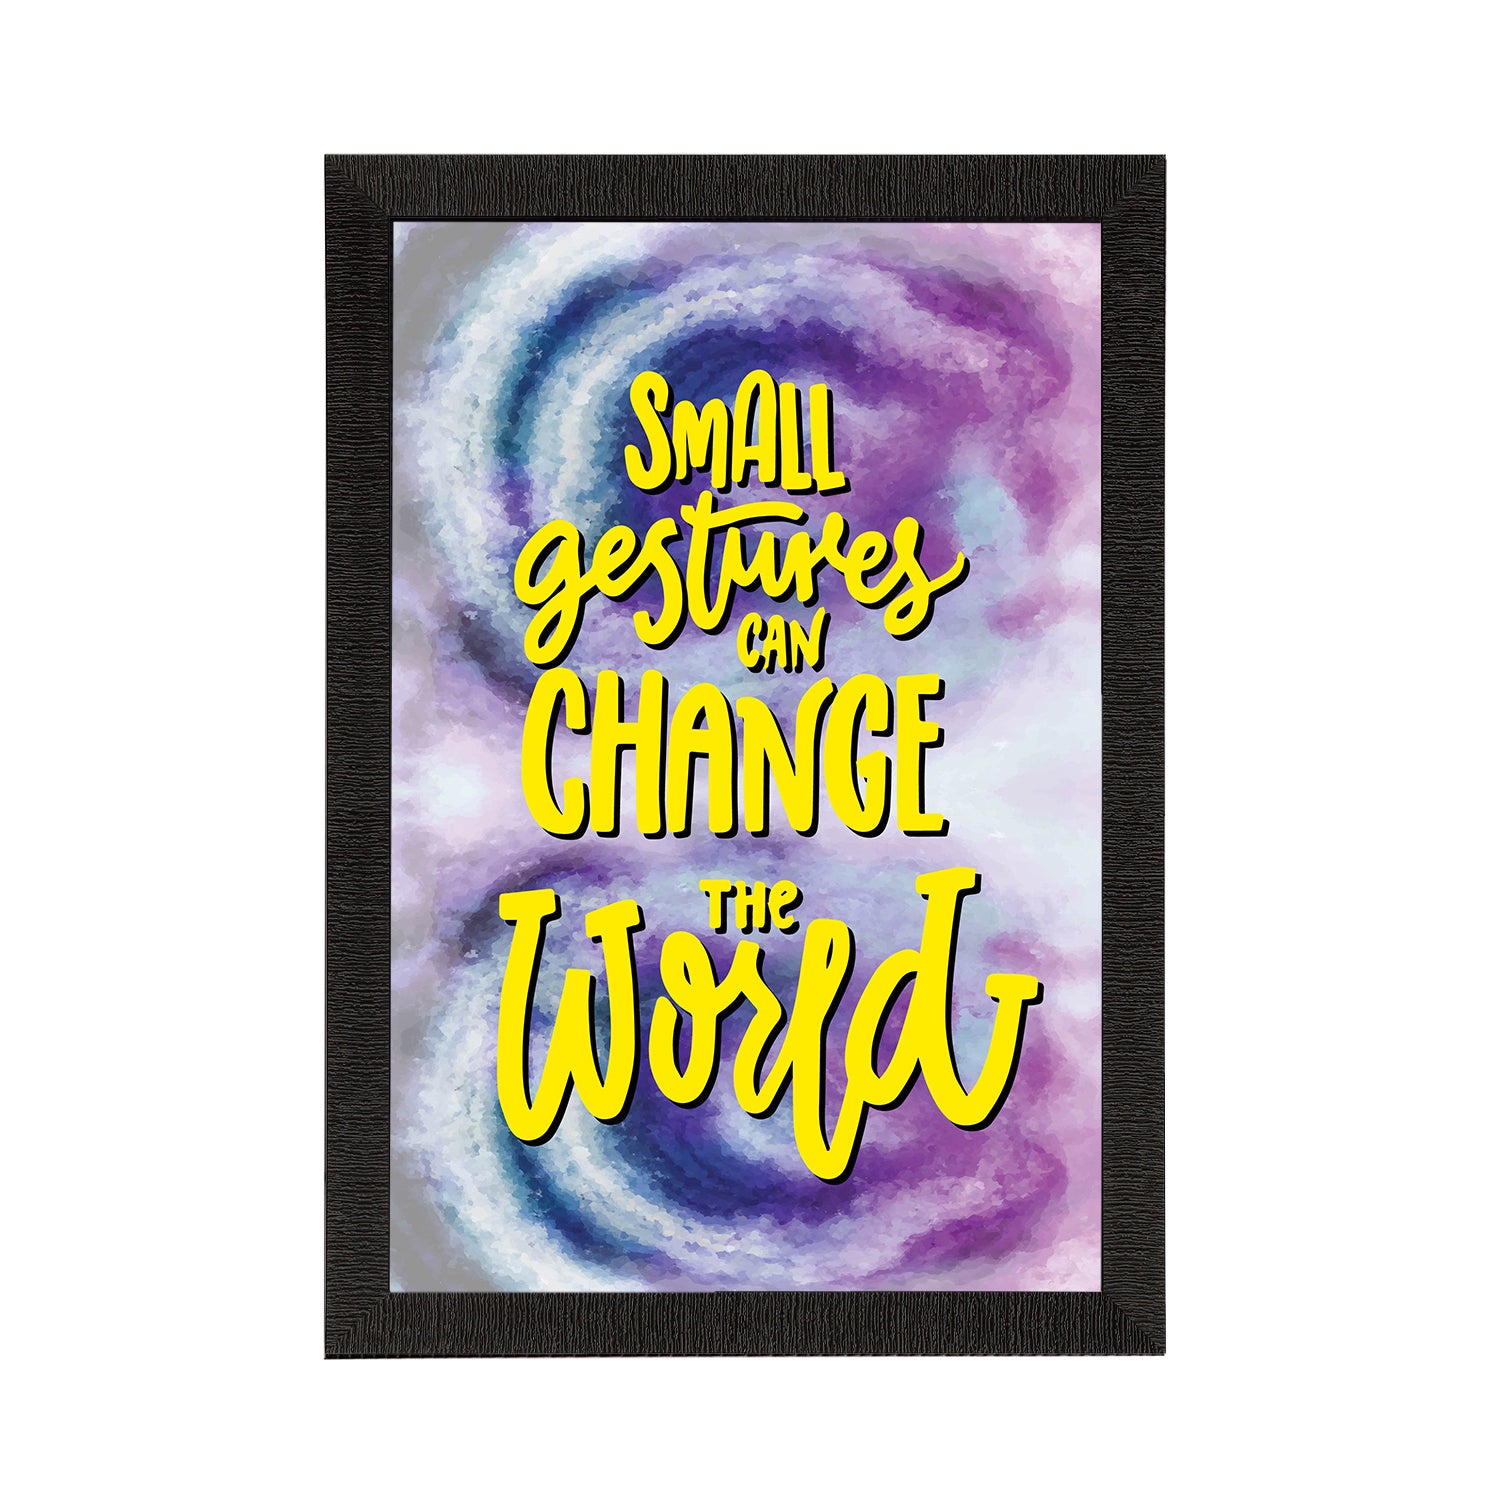 "Small Gestures Can Change The World" Motivational Quote Satin Matt Texture UV Art Painting